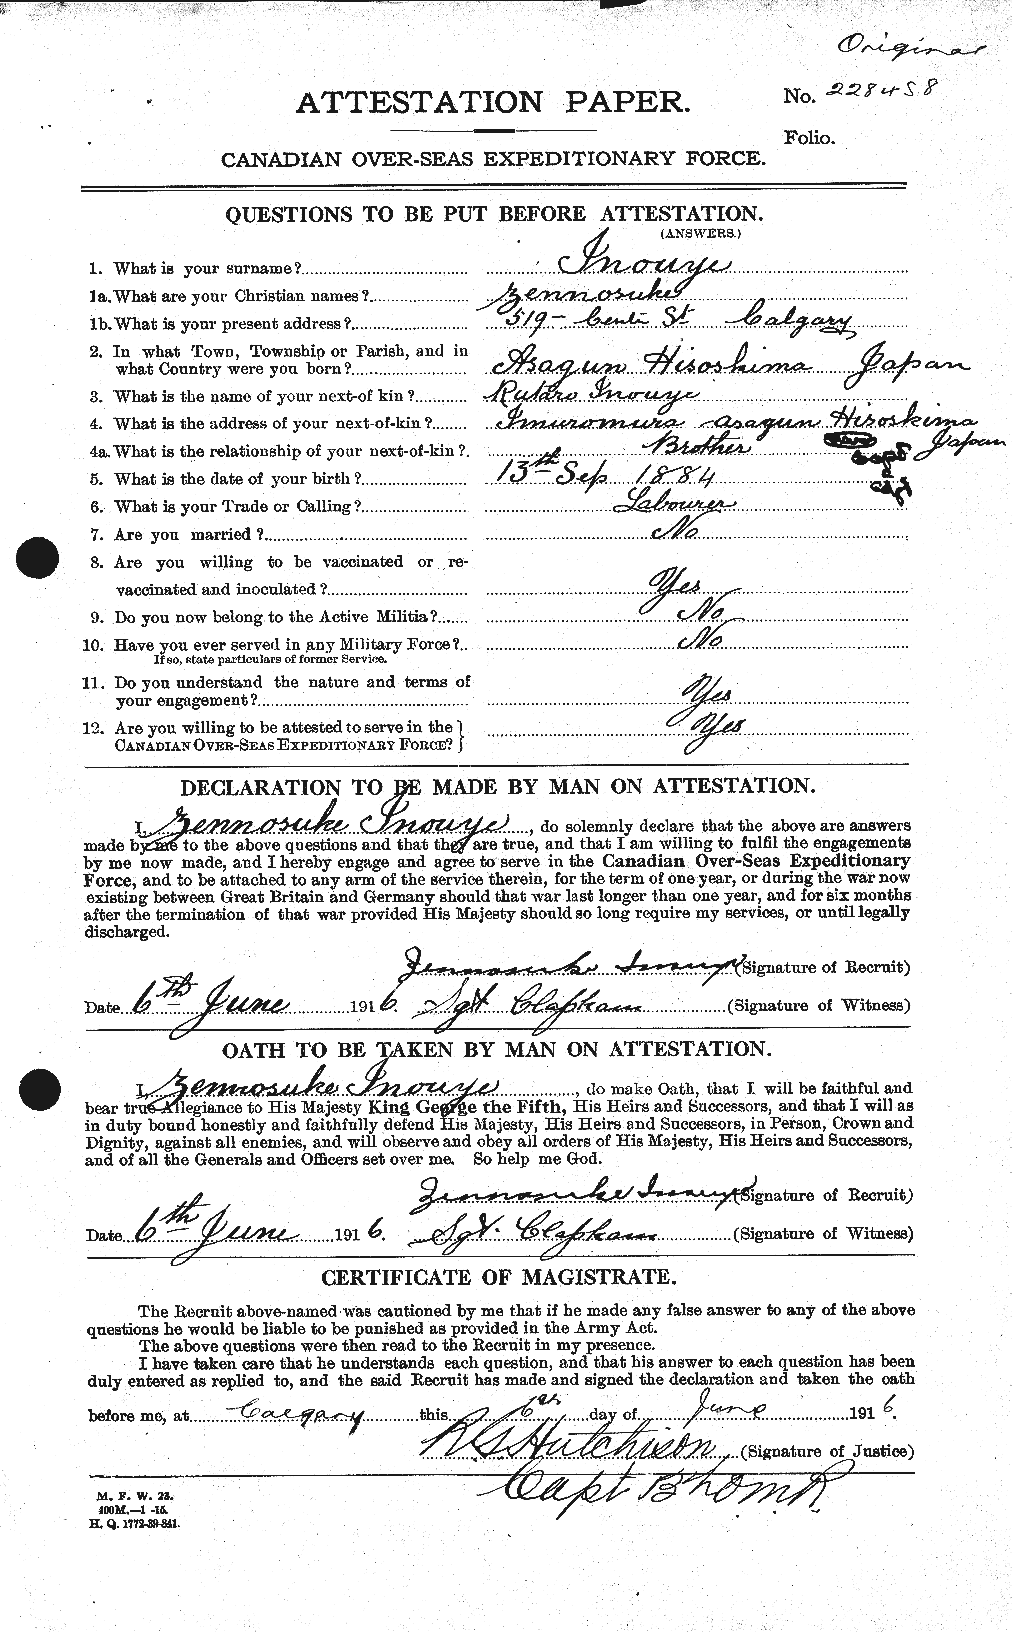 Personnel Records of the First World War - CEF 415498a